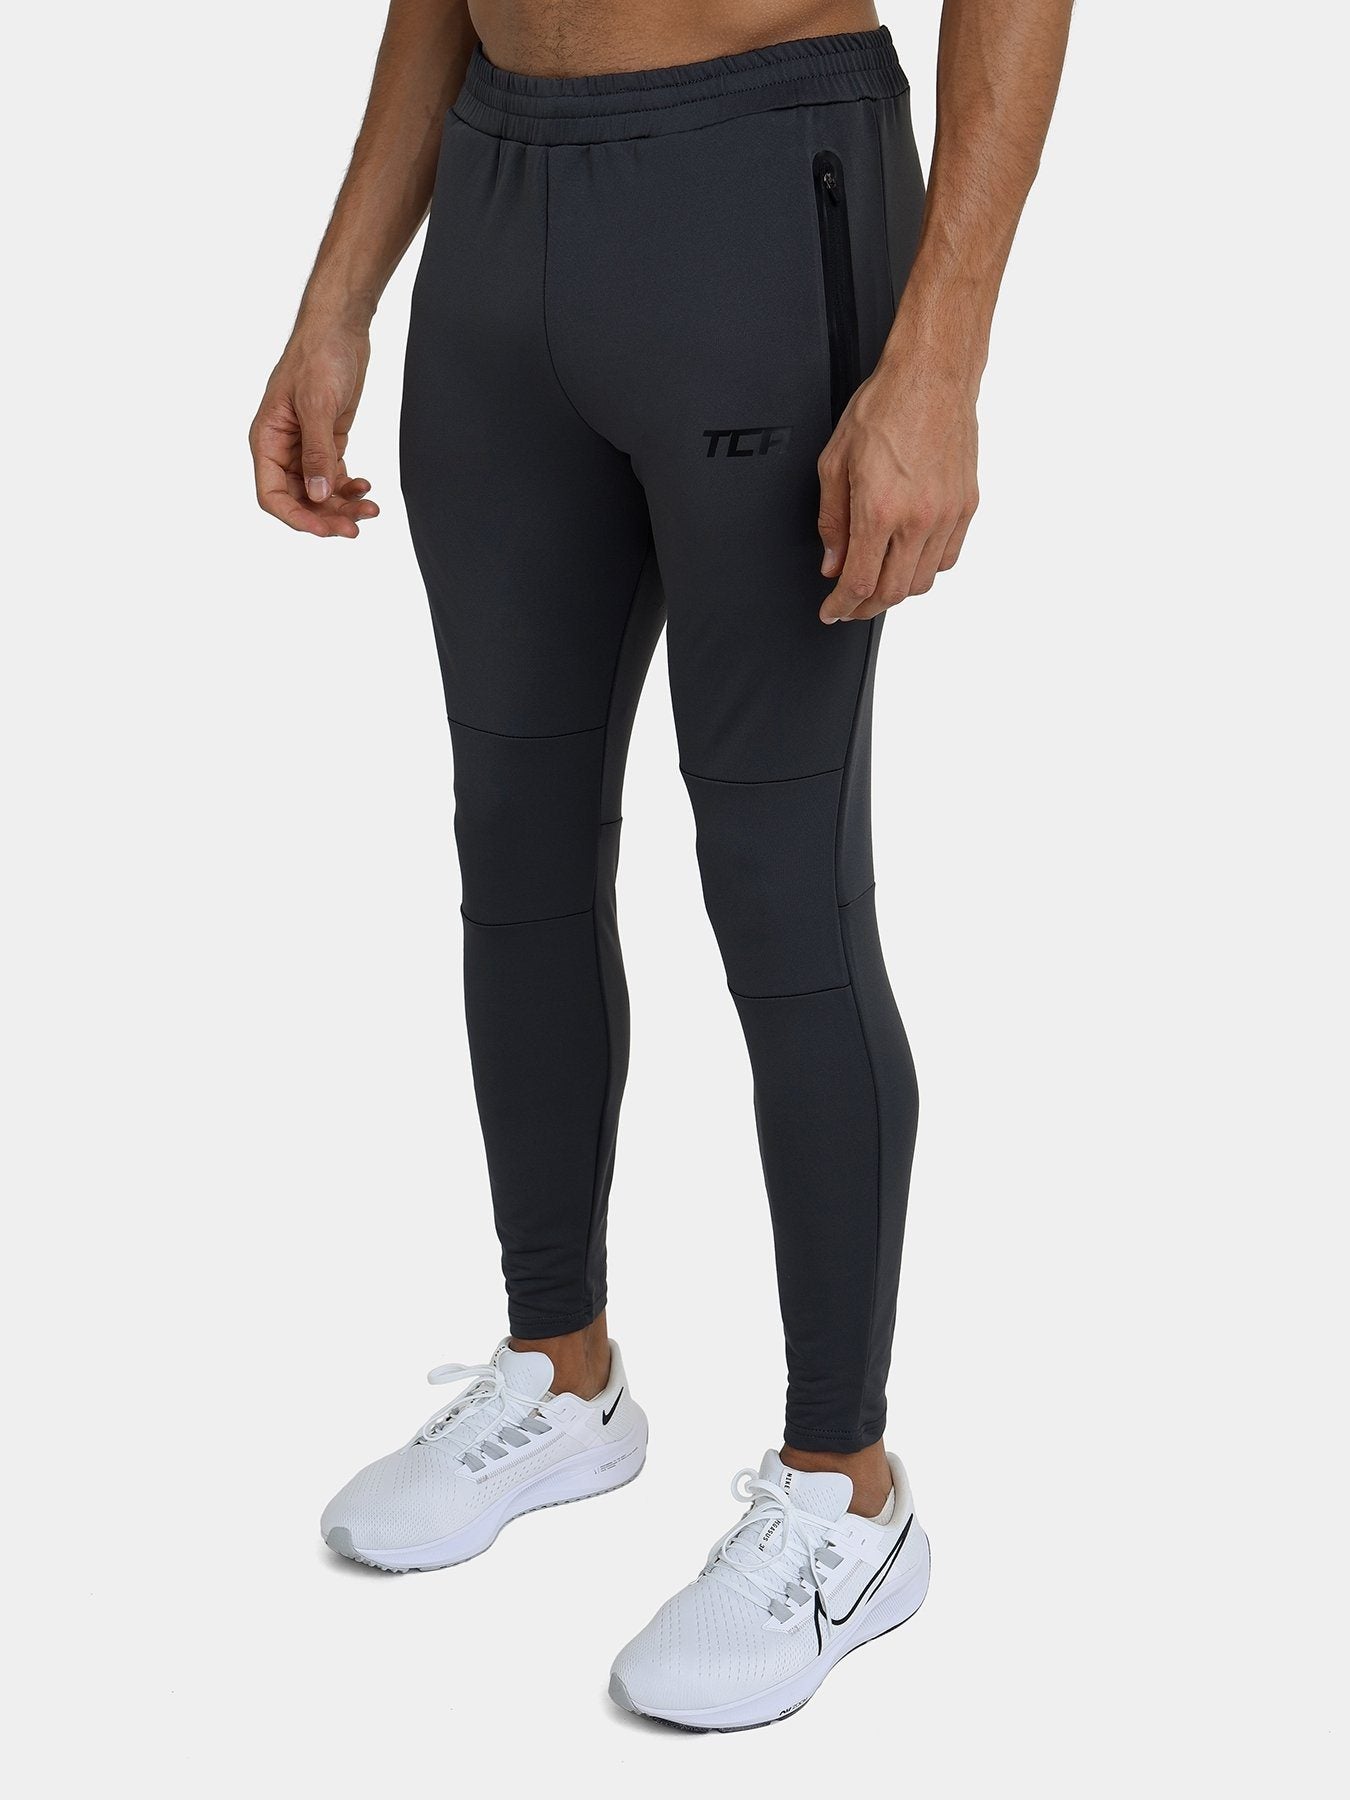 Men's Rapid Tapered Training Track Pant - Charcoal